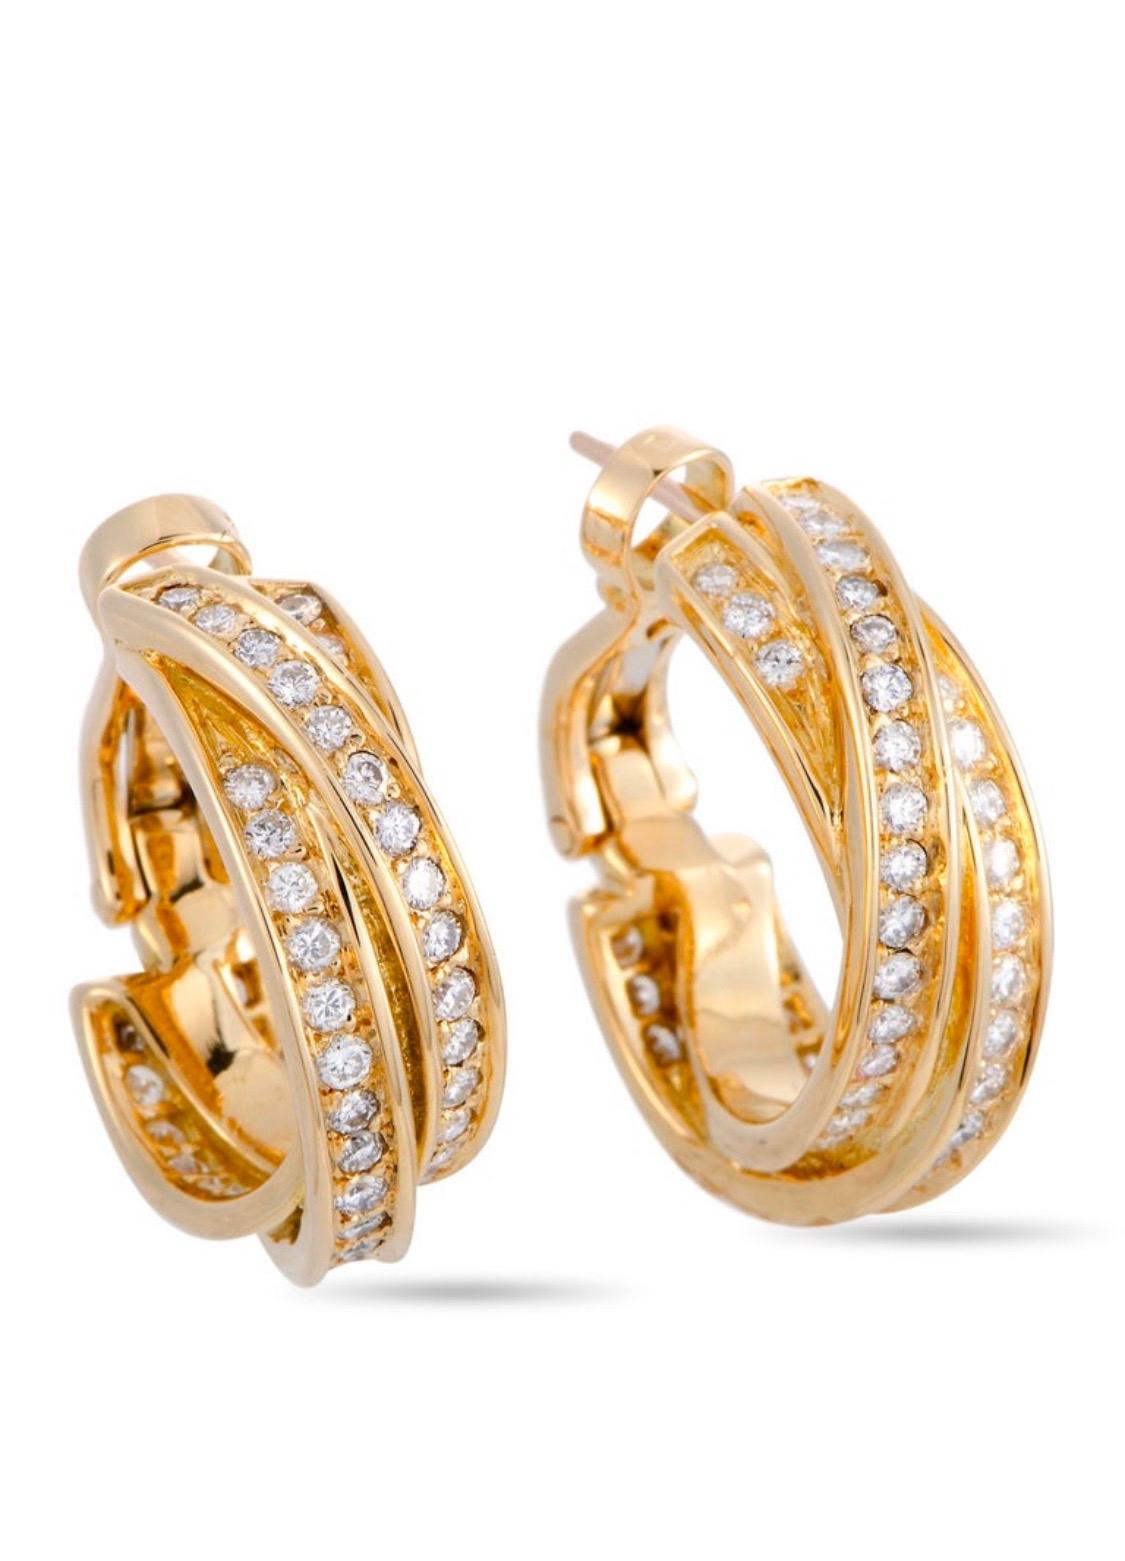 The Cartier “Trinity” earrings are made out of 18K yellow gold and diamonds and each of the two earrings weighs 7.35 grams, measuring 0.81” in length and 0.25” in width.

